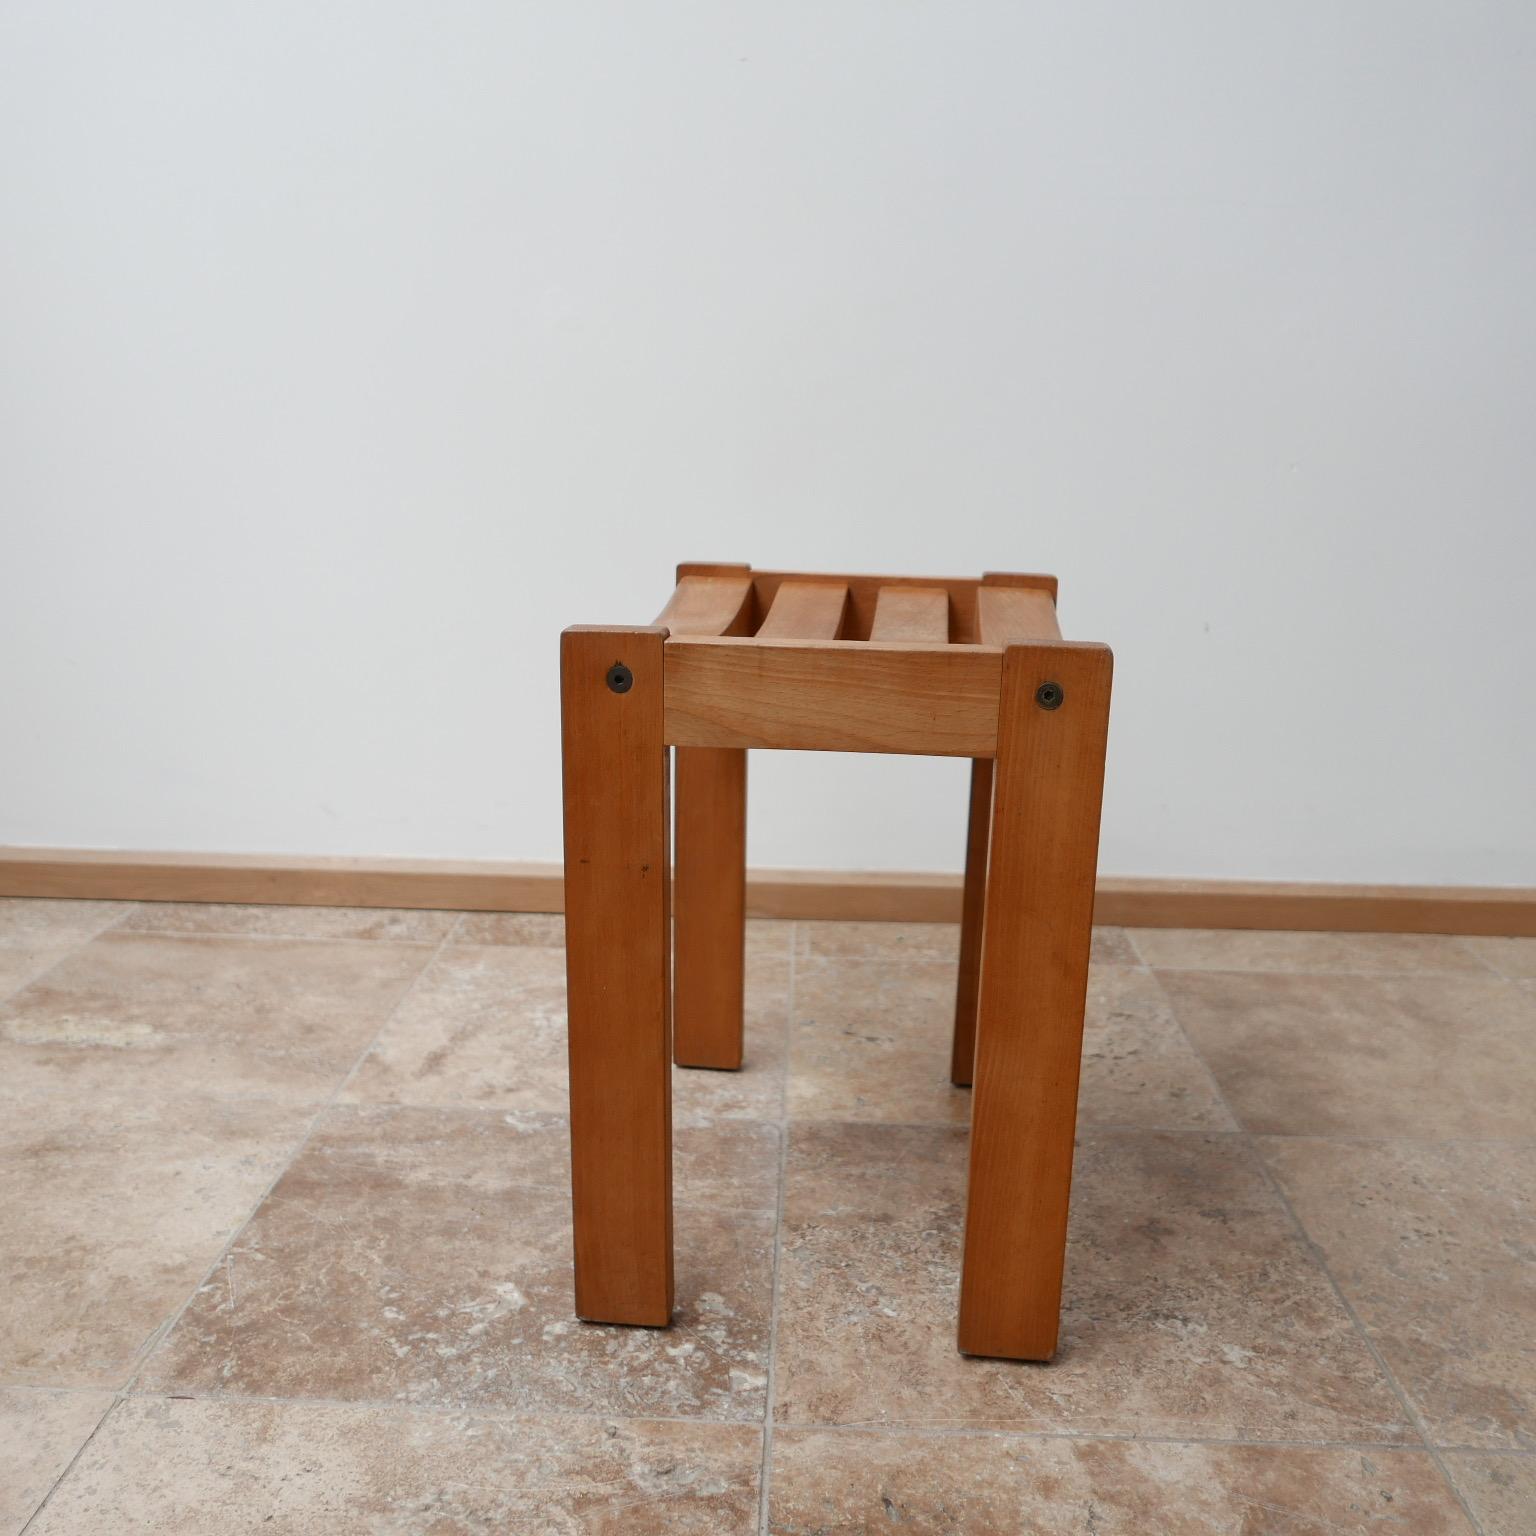 Midcentury French Blonde Oak Stools in the Manner of Guillerme et Chambron '11' For Sale 6